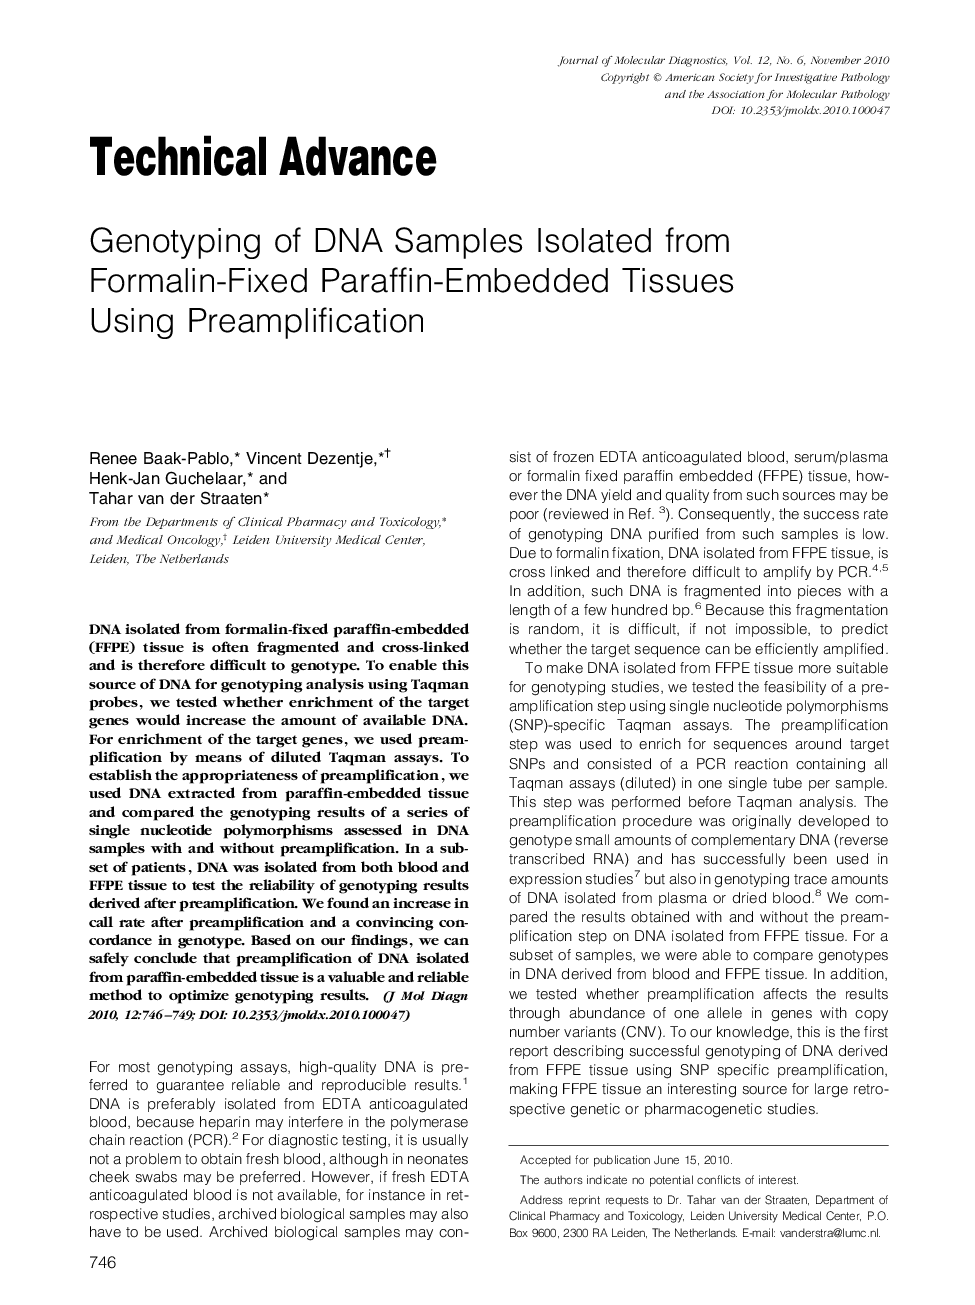 Genotyping of DNA Samples Isolated from Formalin-Fixed Paraffin-Embedded Tissues Using Preamplification 